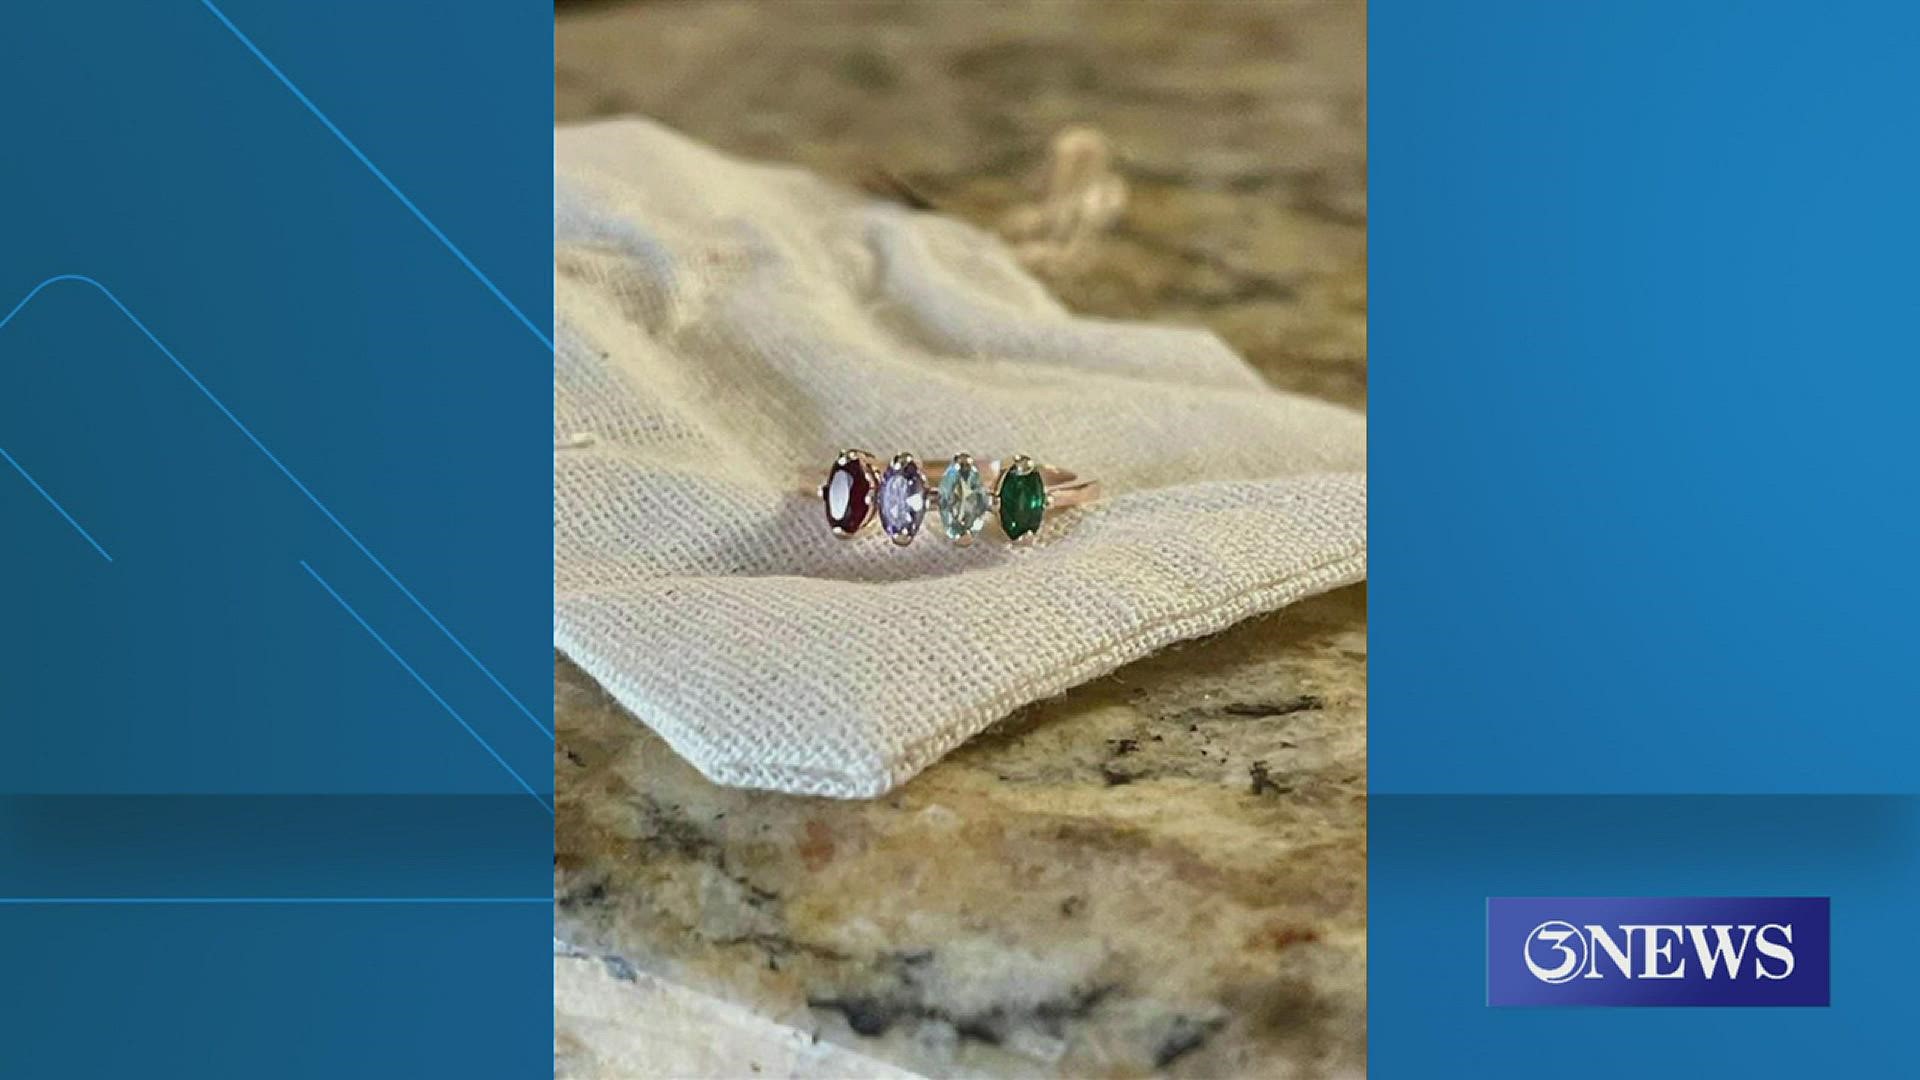 When one Corpus Christi mom lost her most prized possession, she took to social media for any small chance it may be returned. It worked.